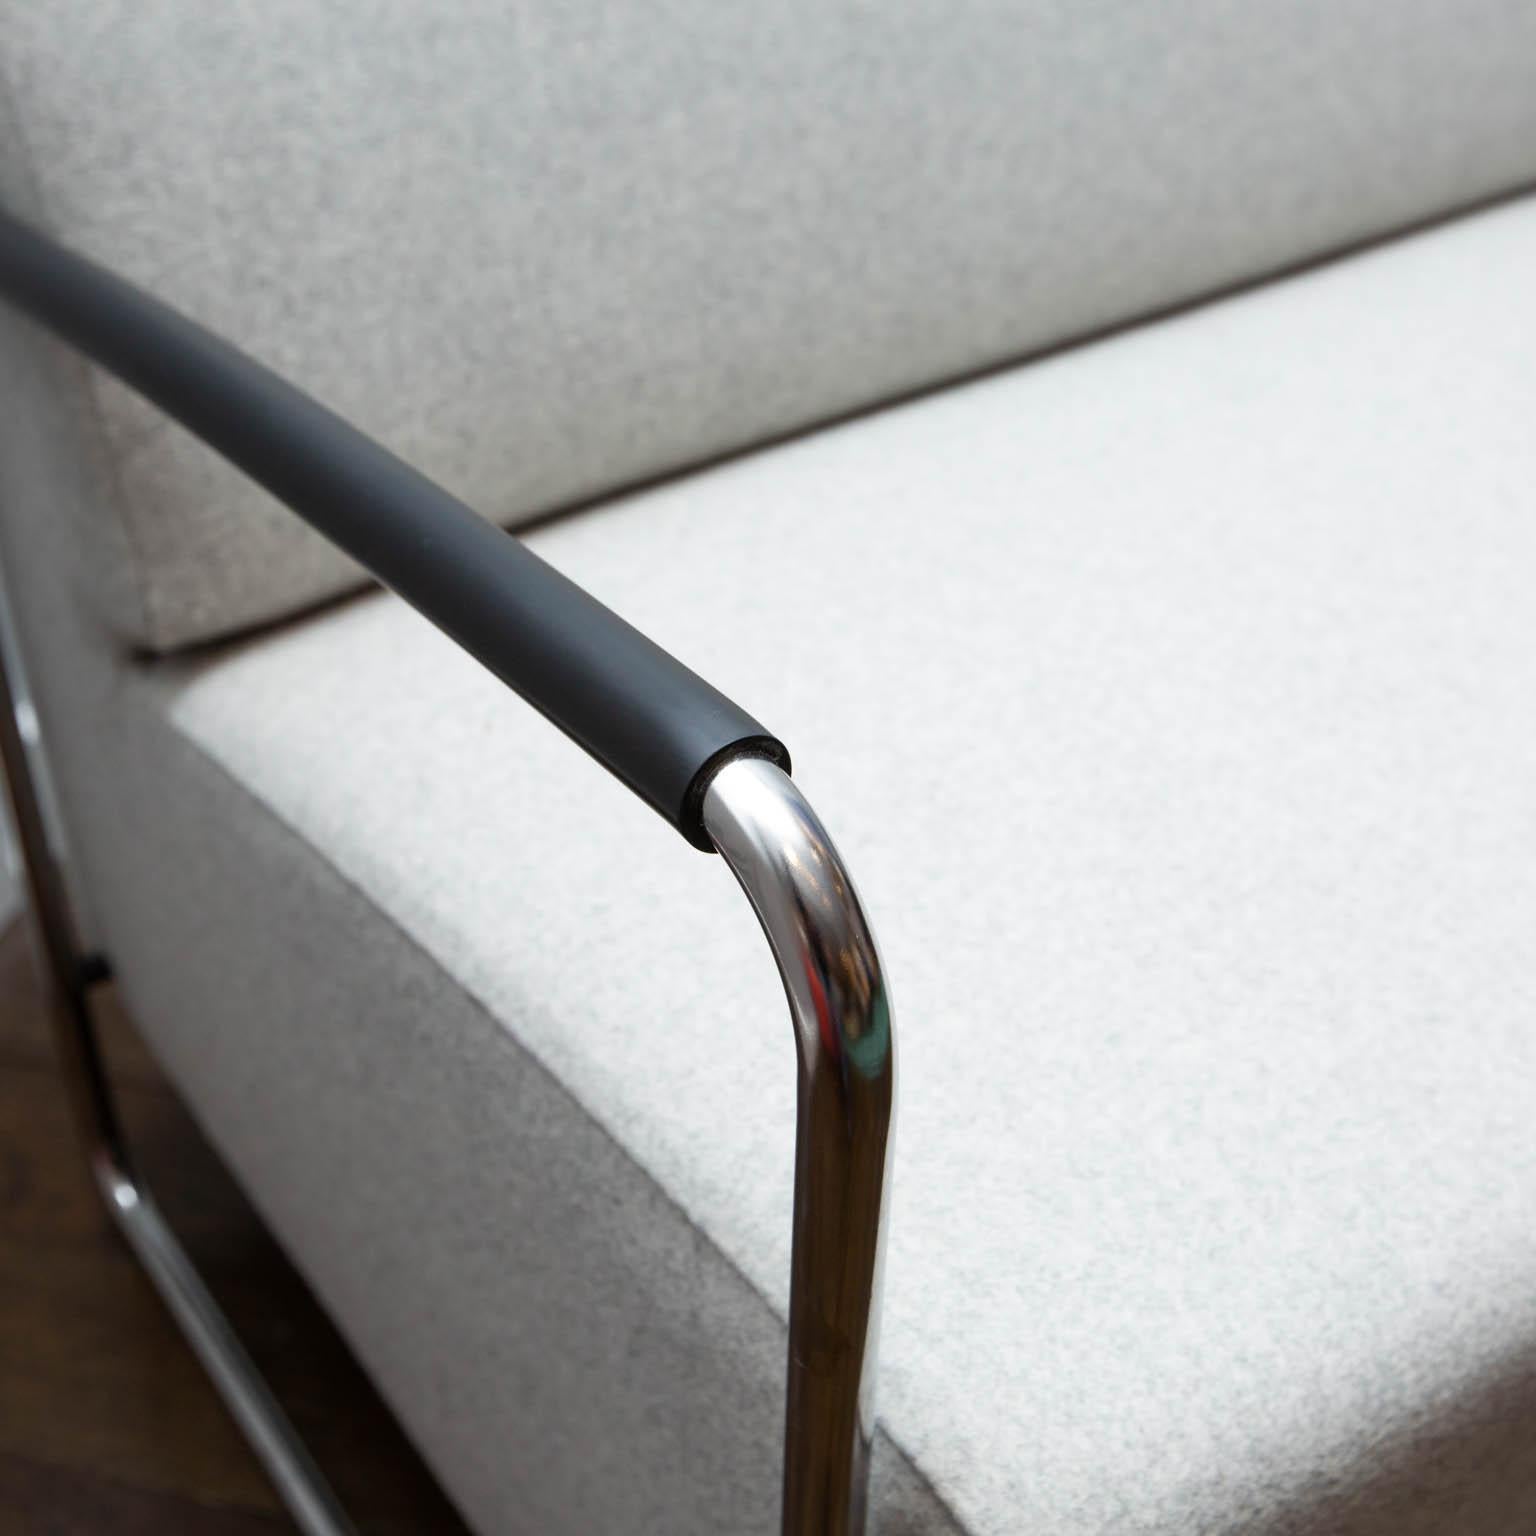 Designed by Norbert Novotny for Swiss furniture maker Dietiker. This new/old stock sofa is finished in light grey Kvadrat wool. It features tubular chrome arms with rubber armrests.